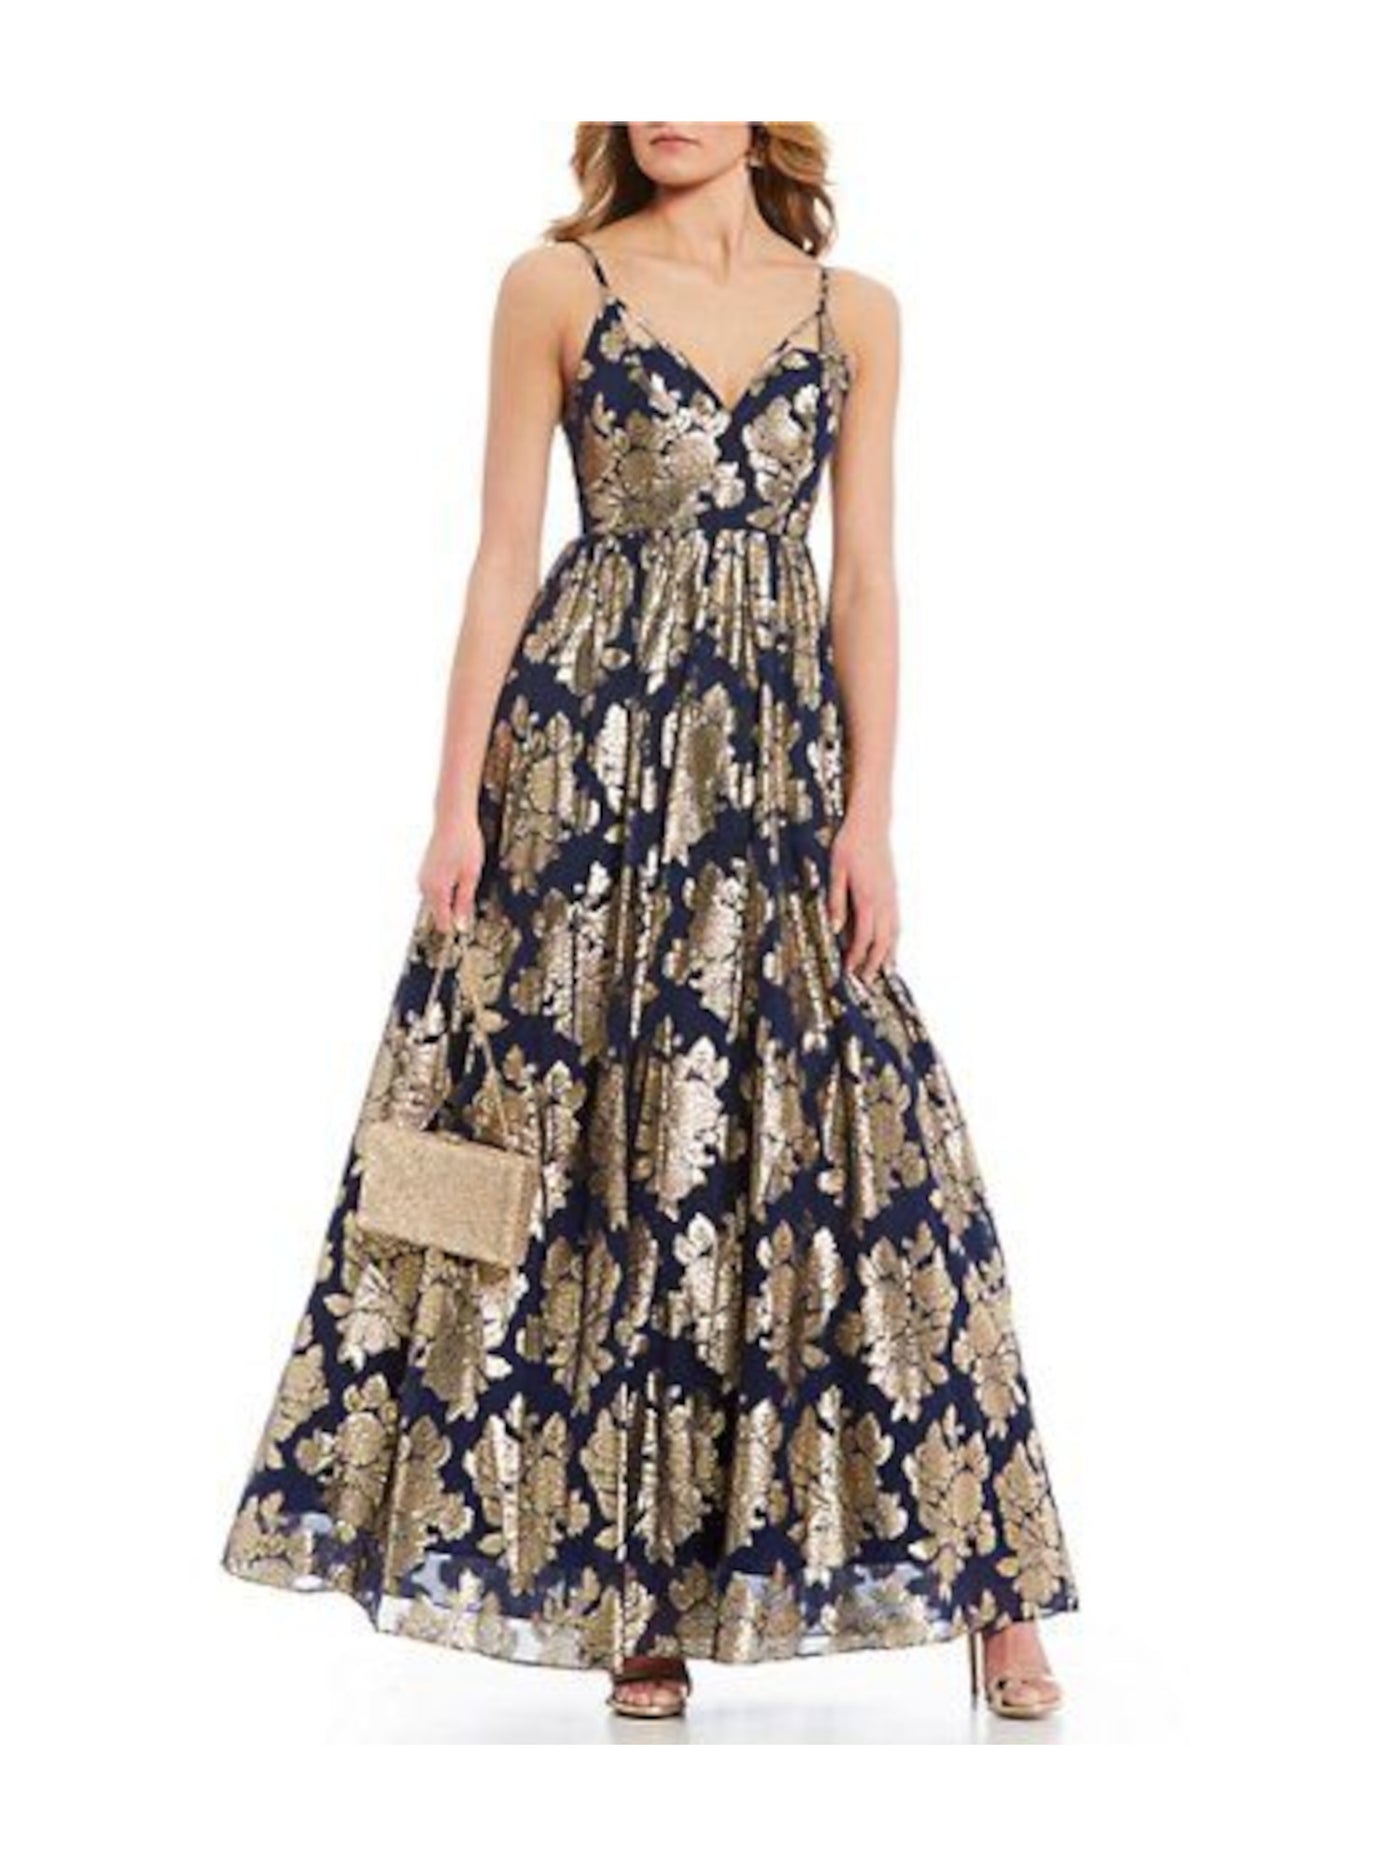 DEAR MOON Womens Navy Metallic Zippered Cut Out Sheer Lined Floral Spaghetti Strap Sweetheart Neckline Full-Length Prom Fit + Flare Dress Juniors 0